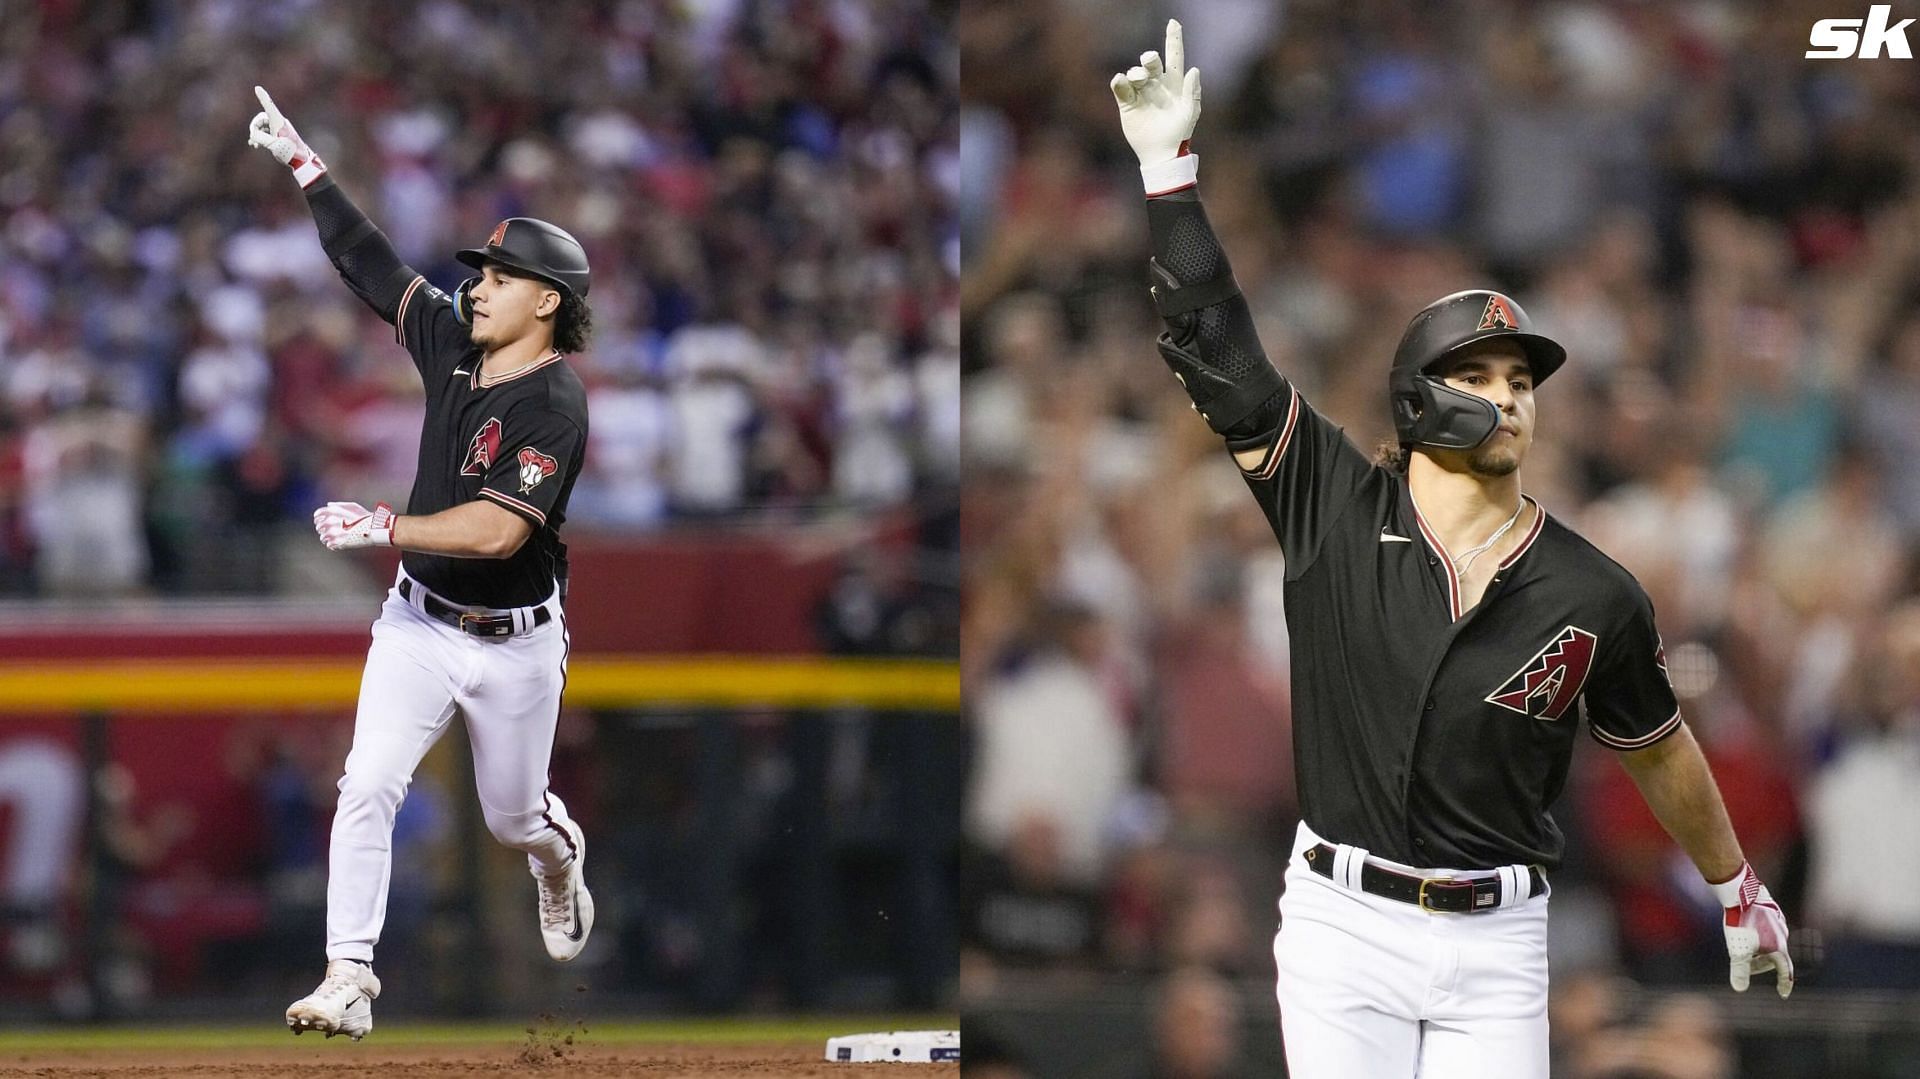 Alex Thomas reflects on game-tying homer in ALCS game 4 for Diamondbacks